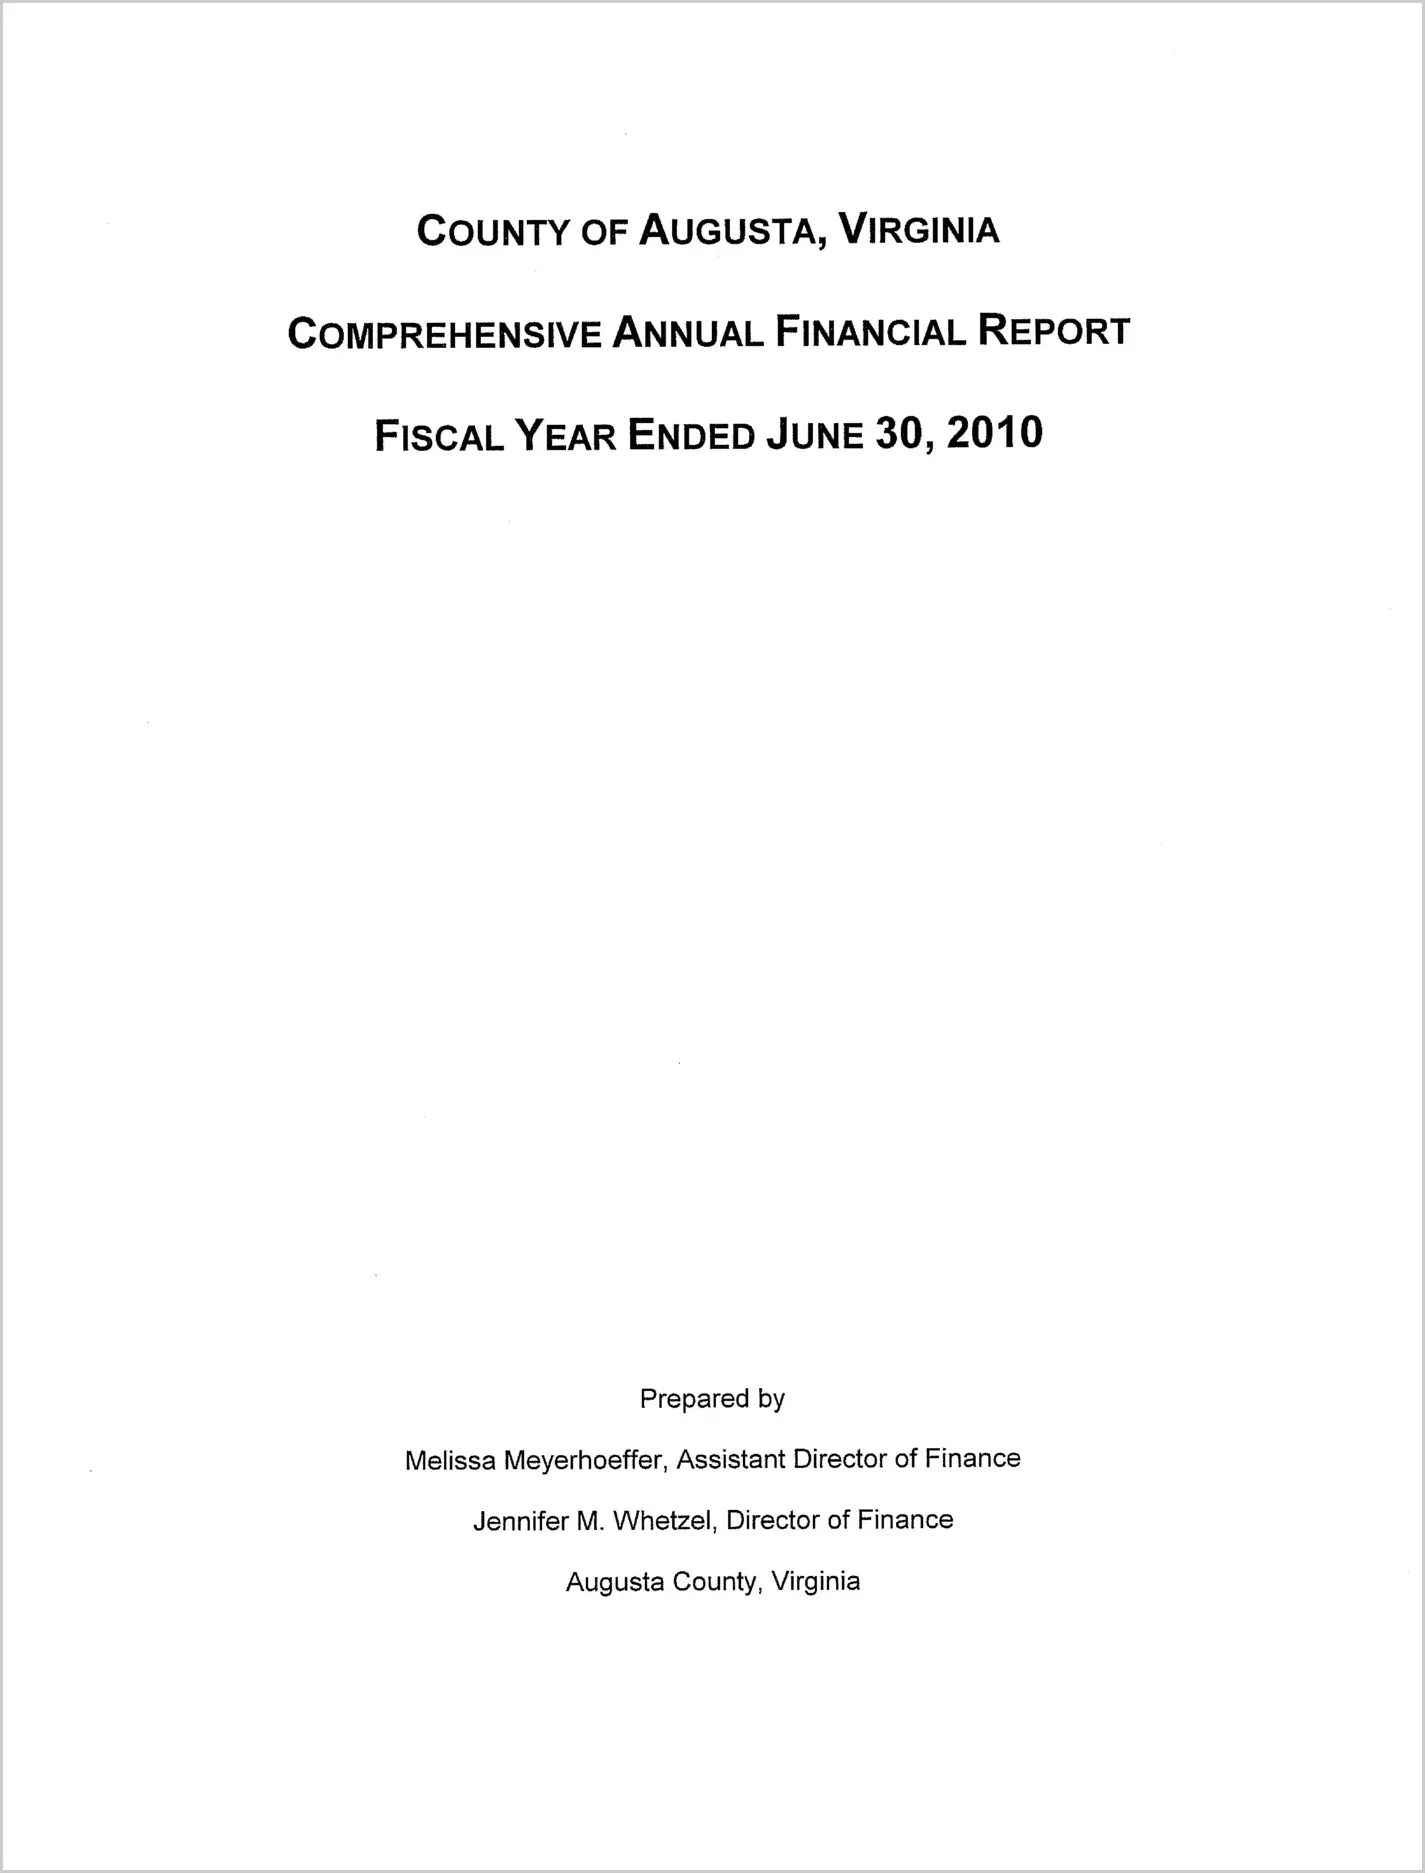 2010 Annual Financial Report for County of Augusta